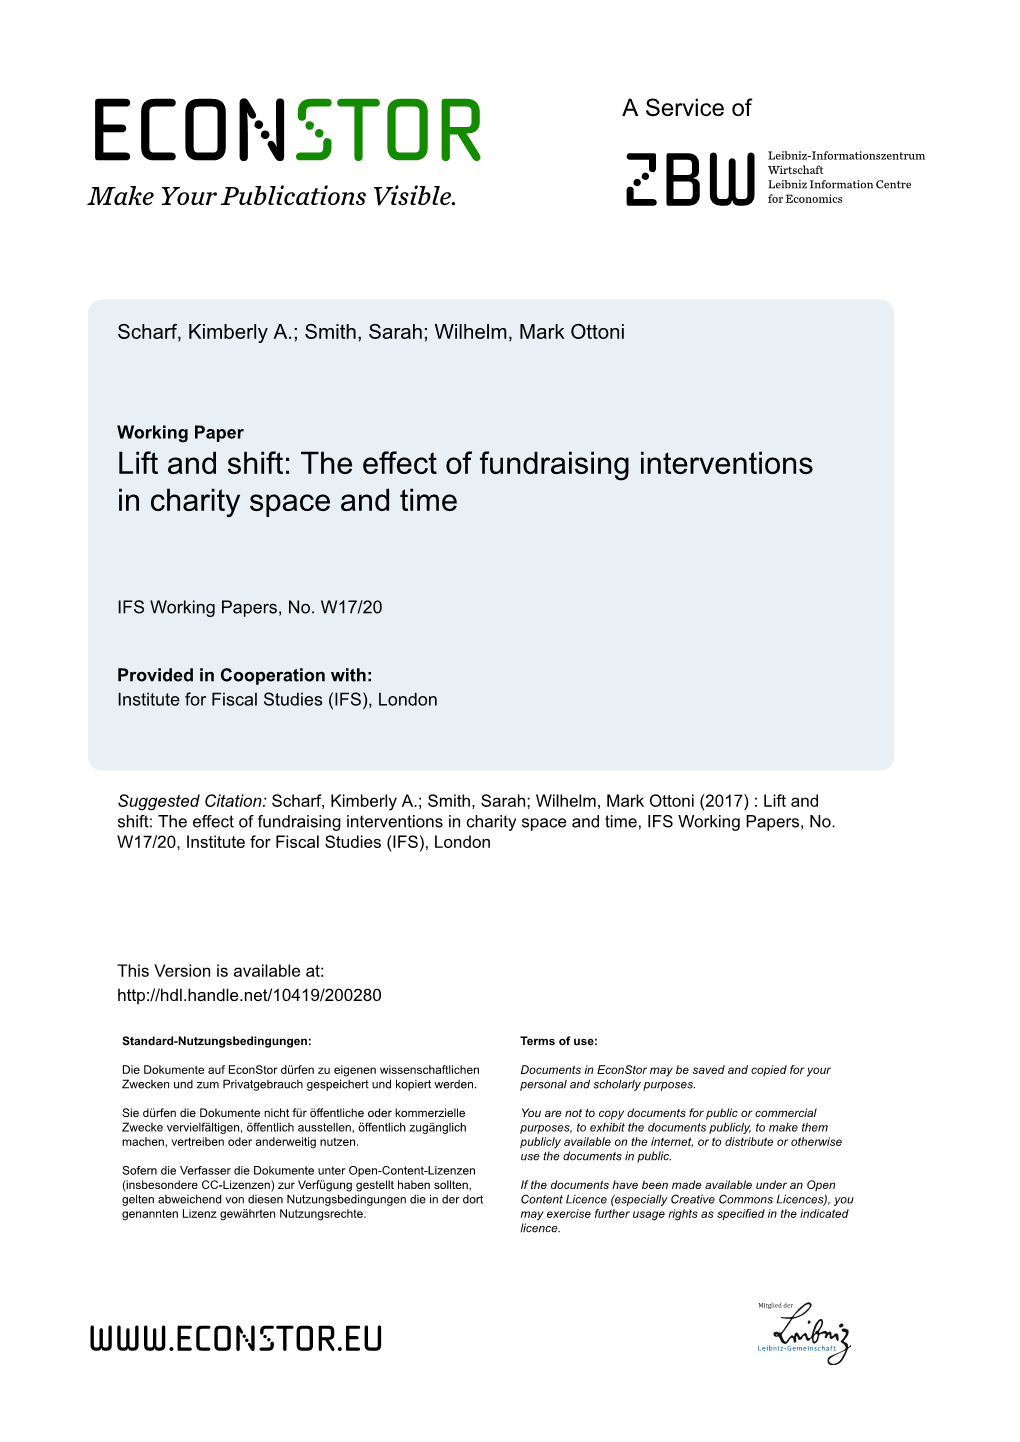 The Effect of Fundraising Interventions in Charity Space and Time